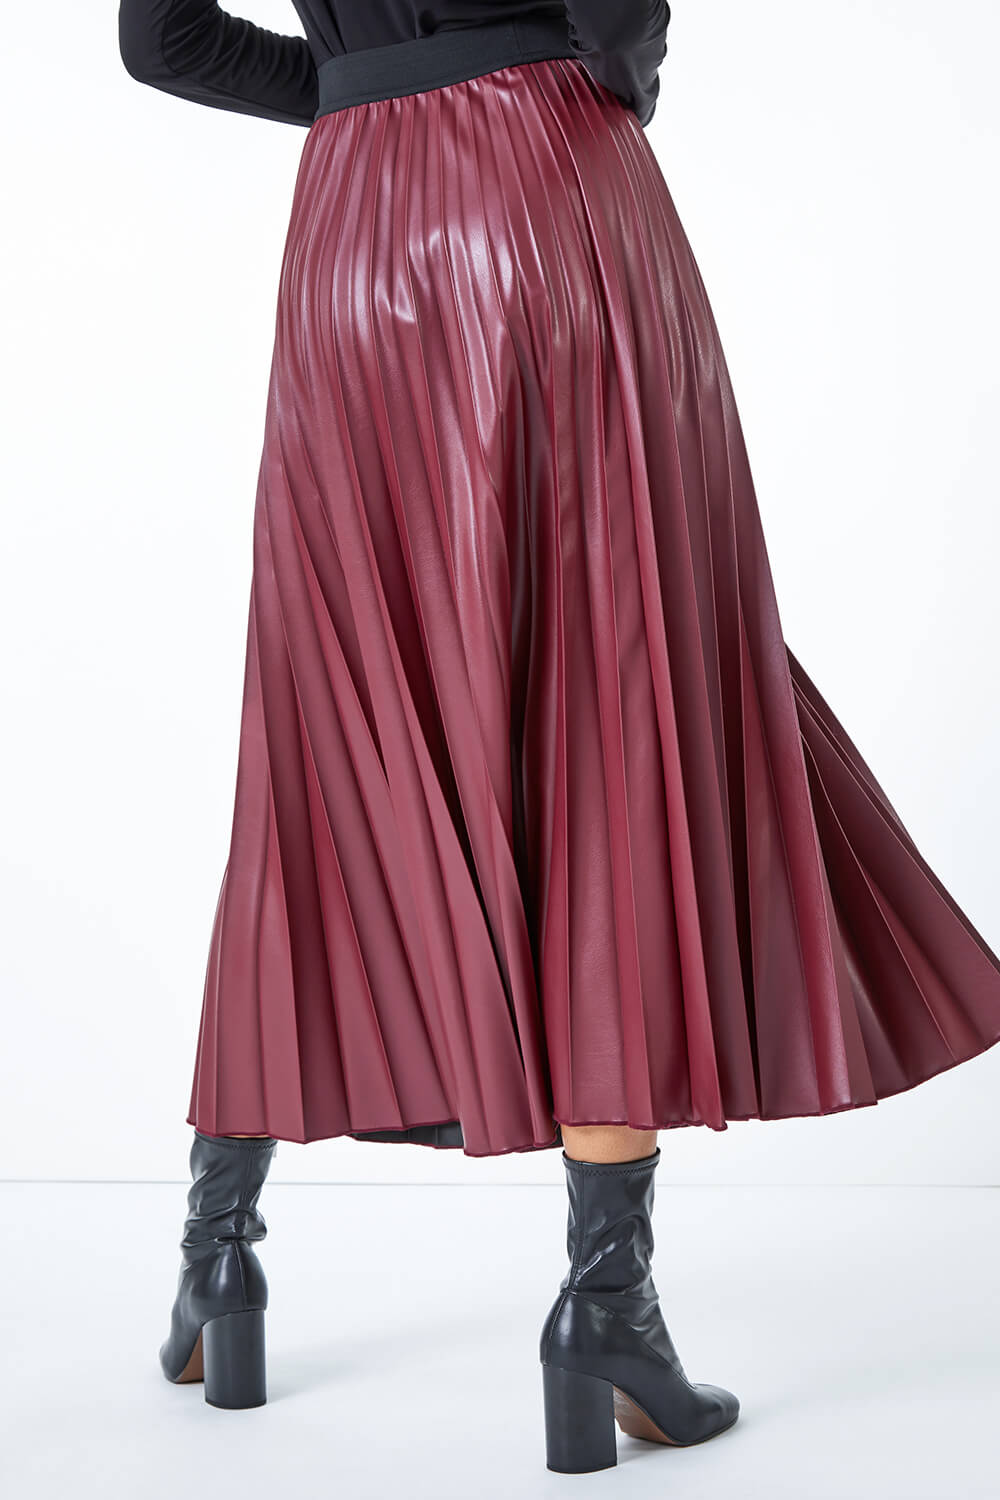 Red Faux Leather Pleated Maxi Skirt, Image 4 of 5